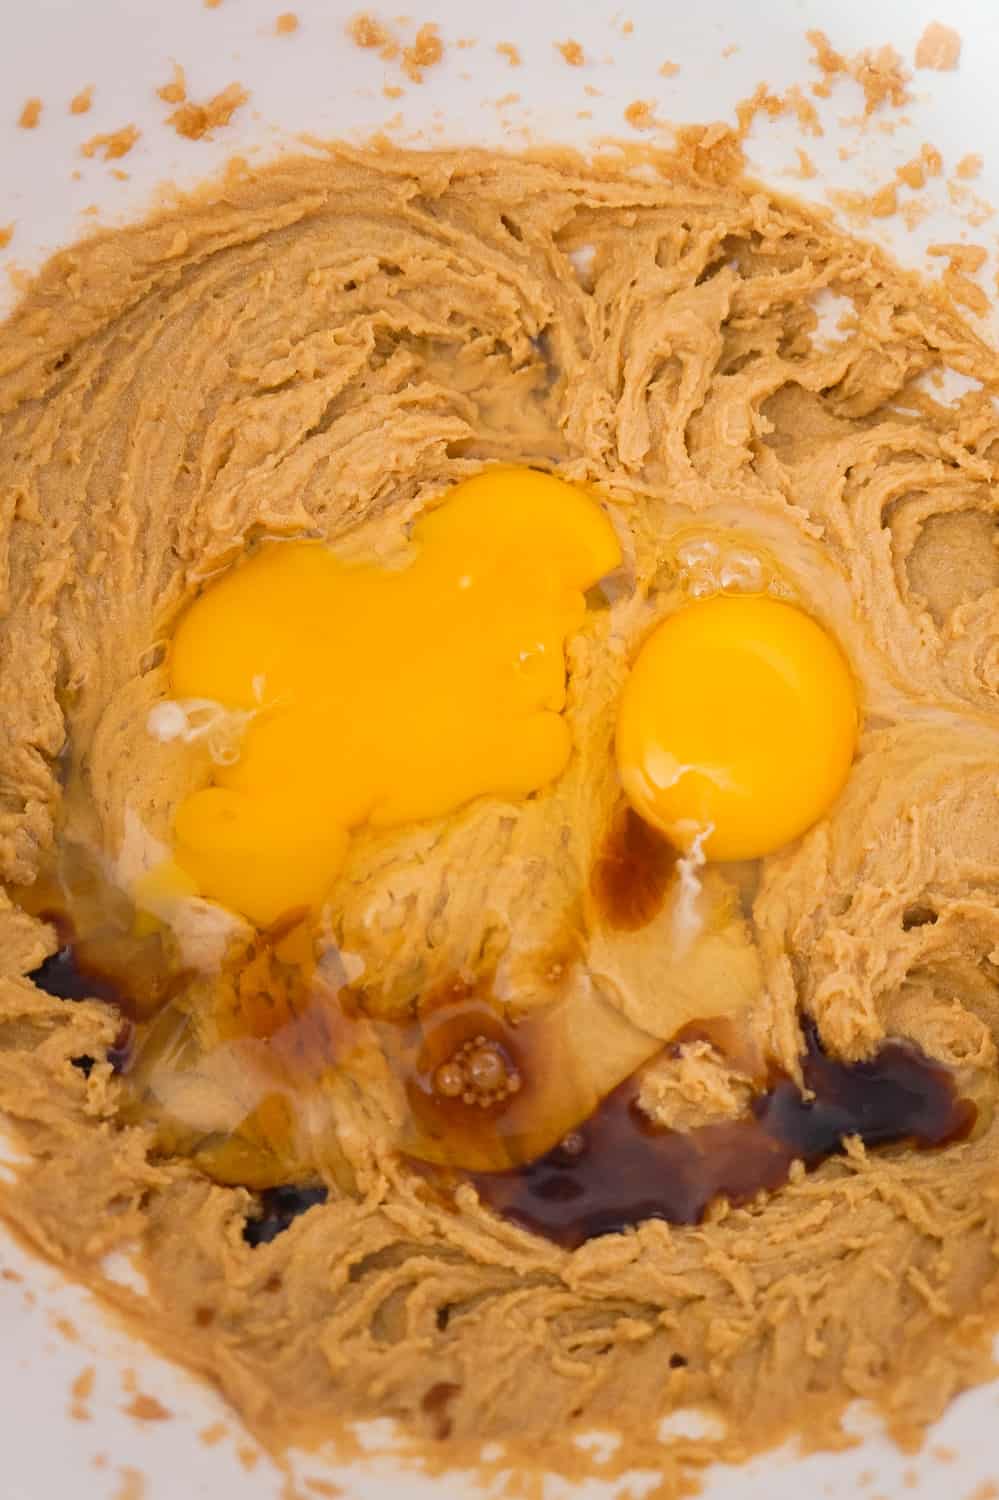 eggs and vanilla extract added to peanut butter mixture